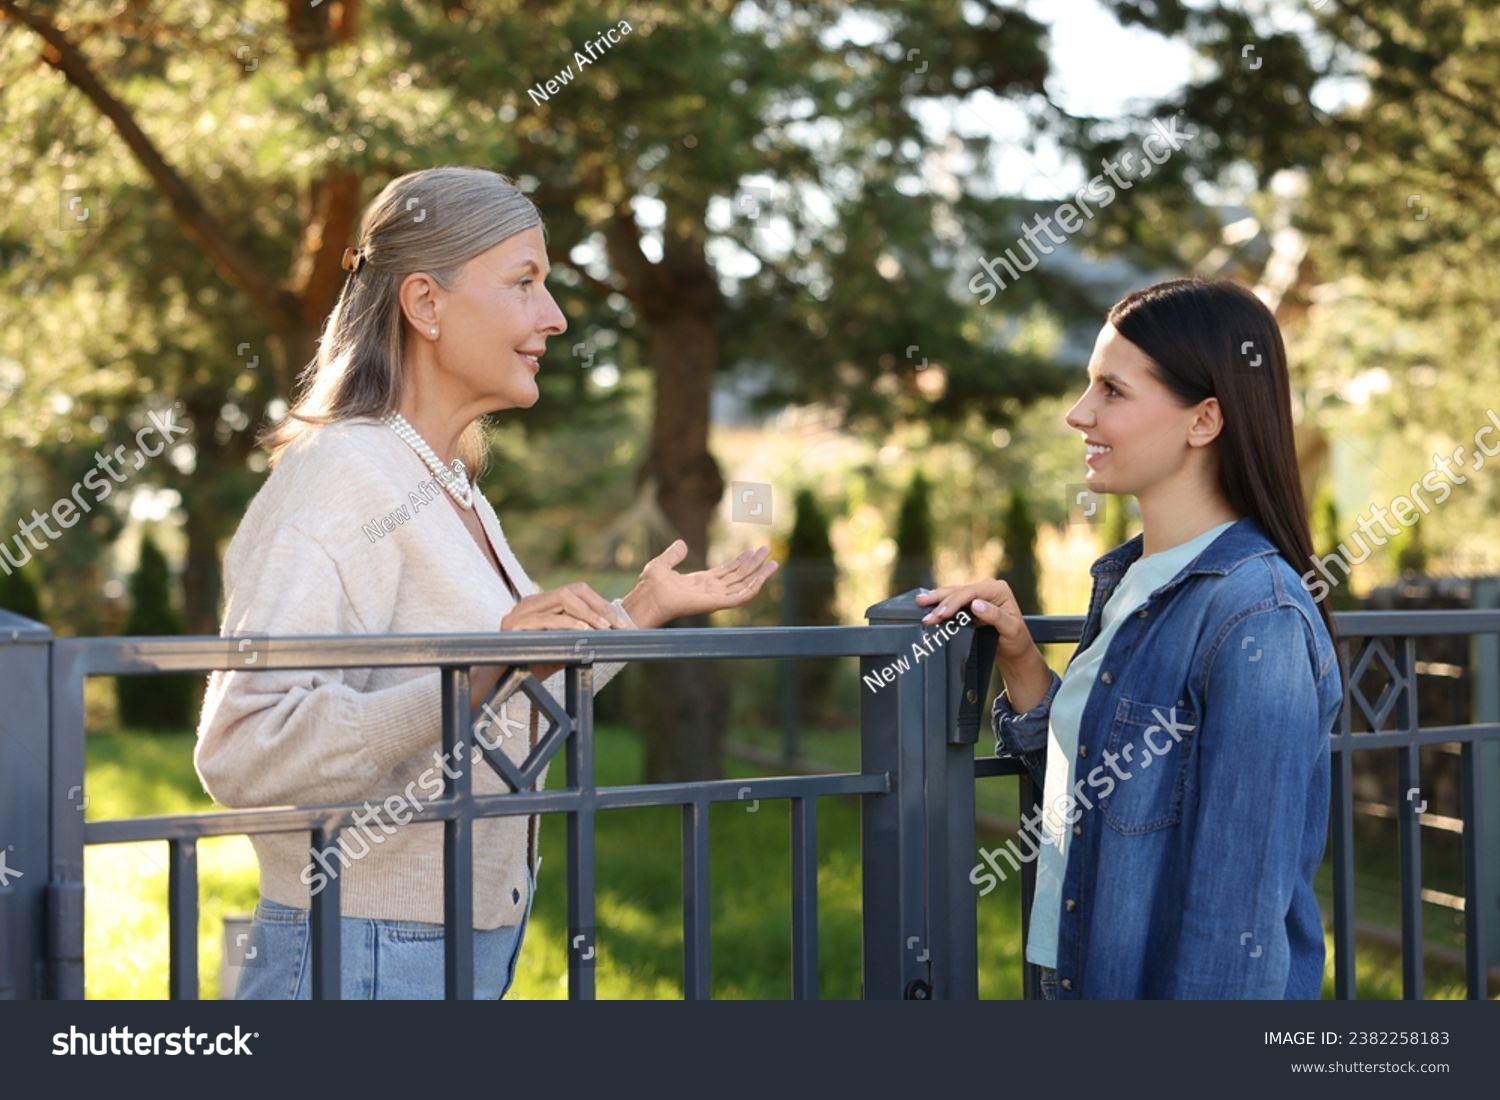 Friendly relationship with neighbours. Happy women talking near fence outdoors #2382258183